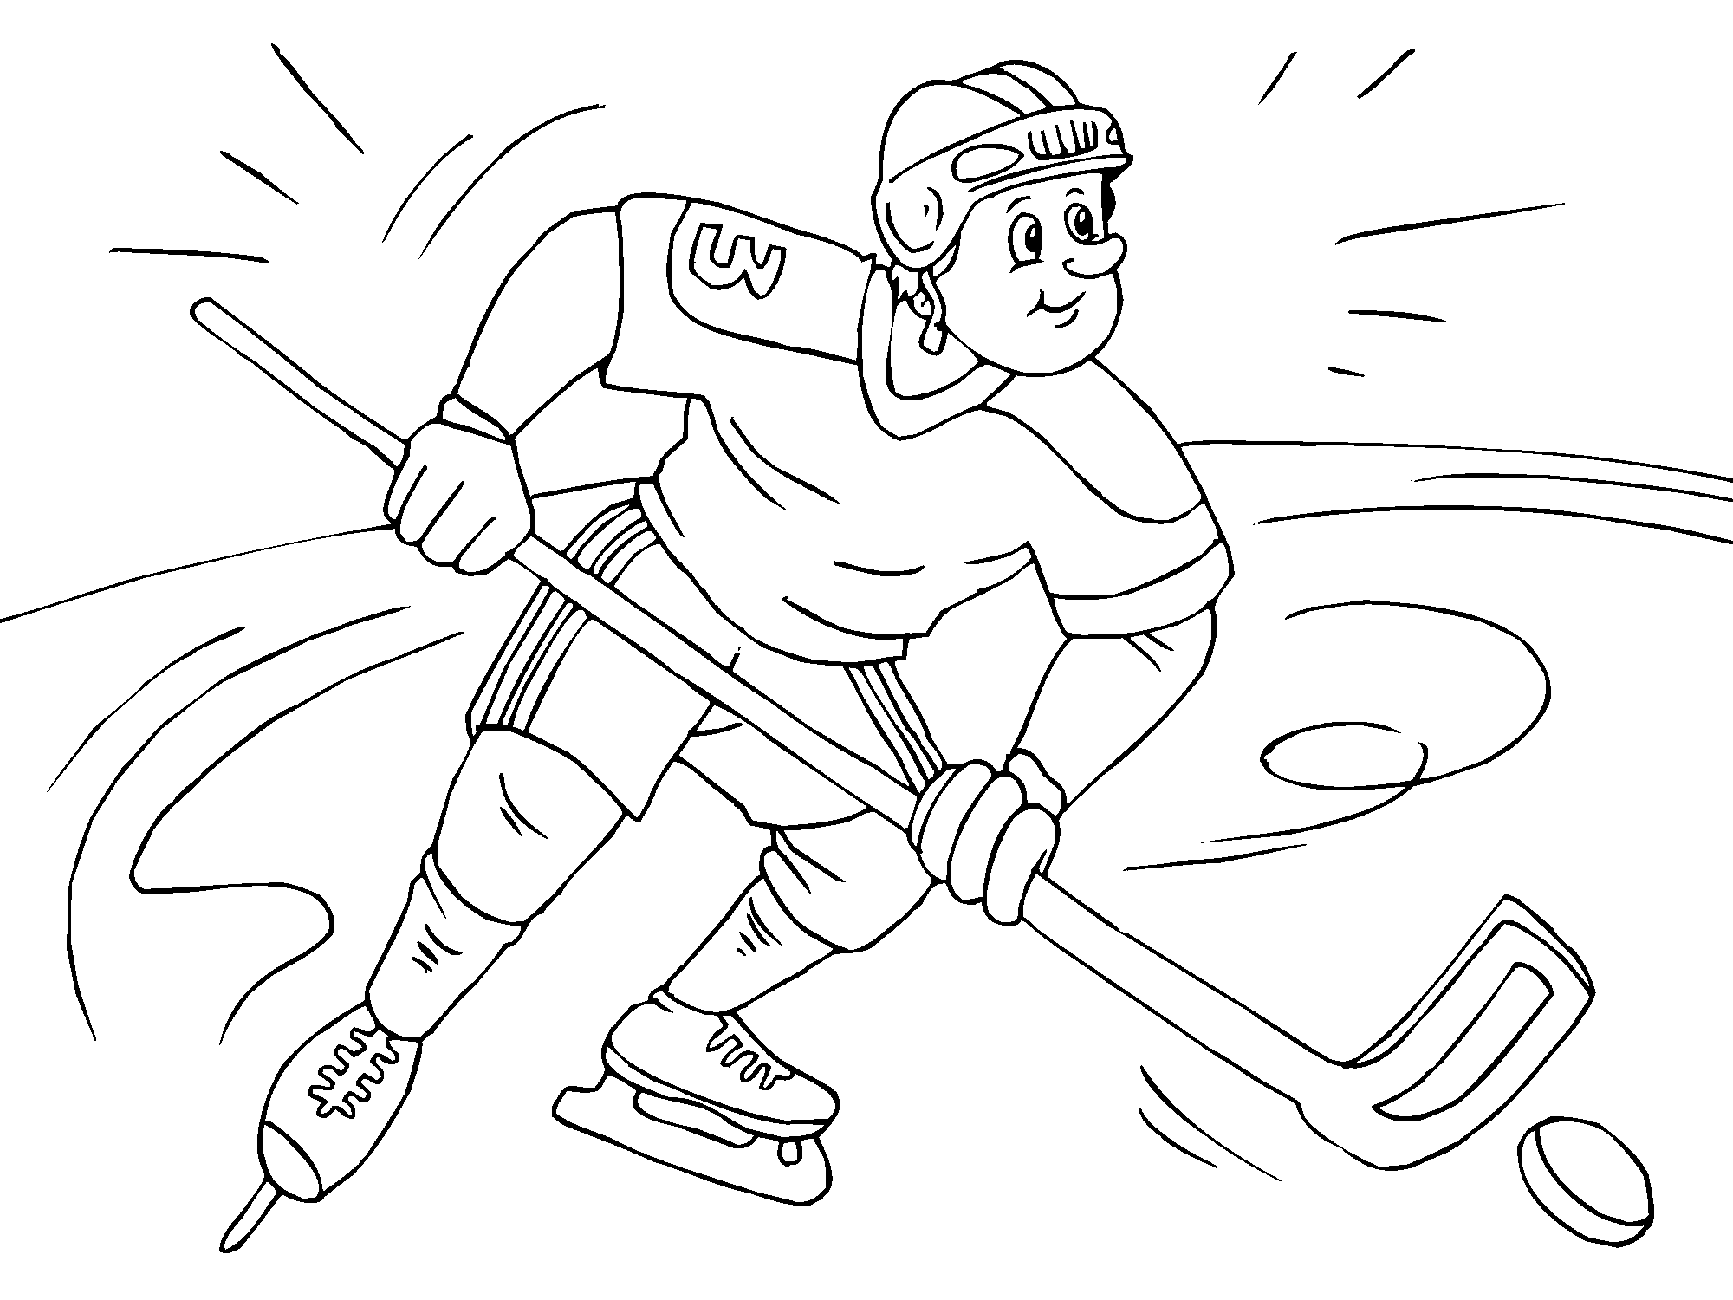 Hockey player coloring pages to download and print for free